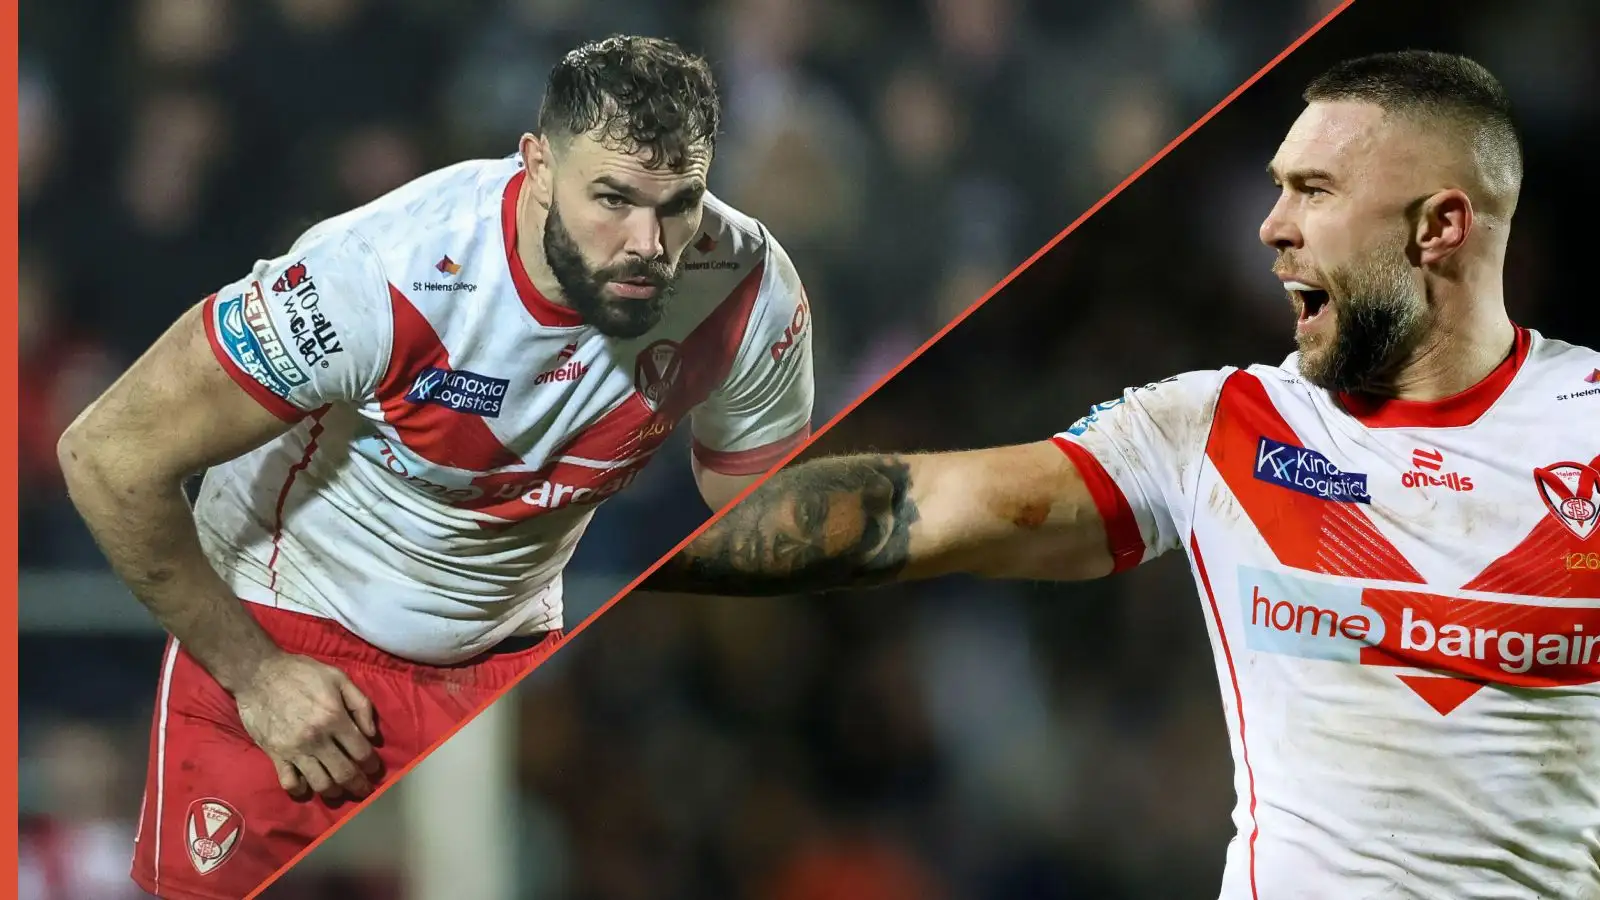 St Helens coach provides latest on duo injured in Warrington Wolves loss